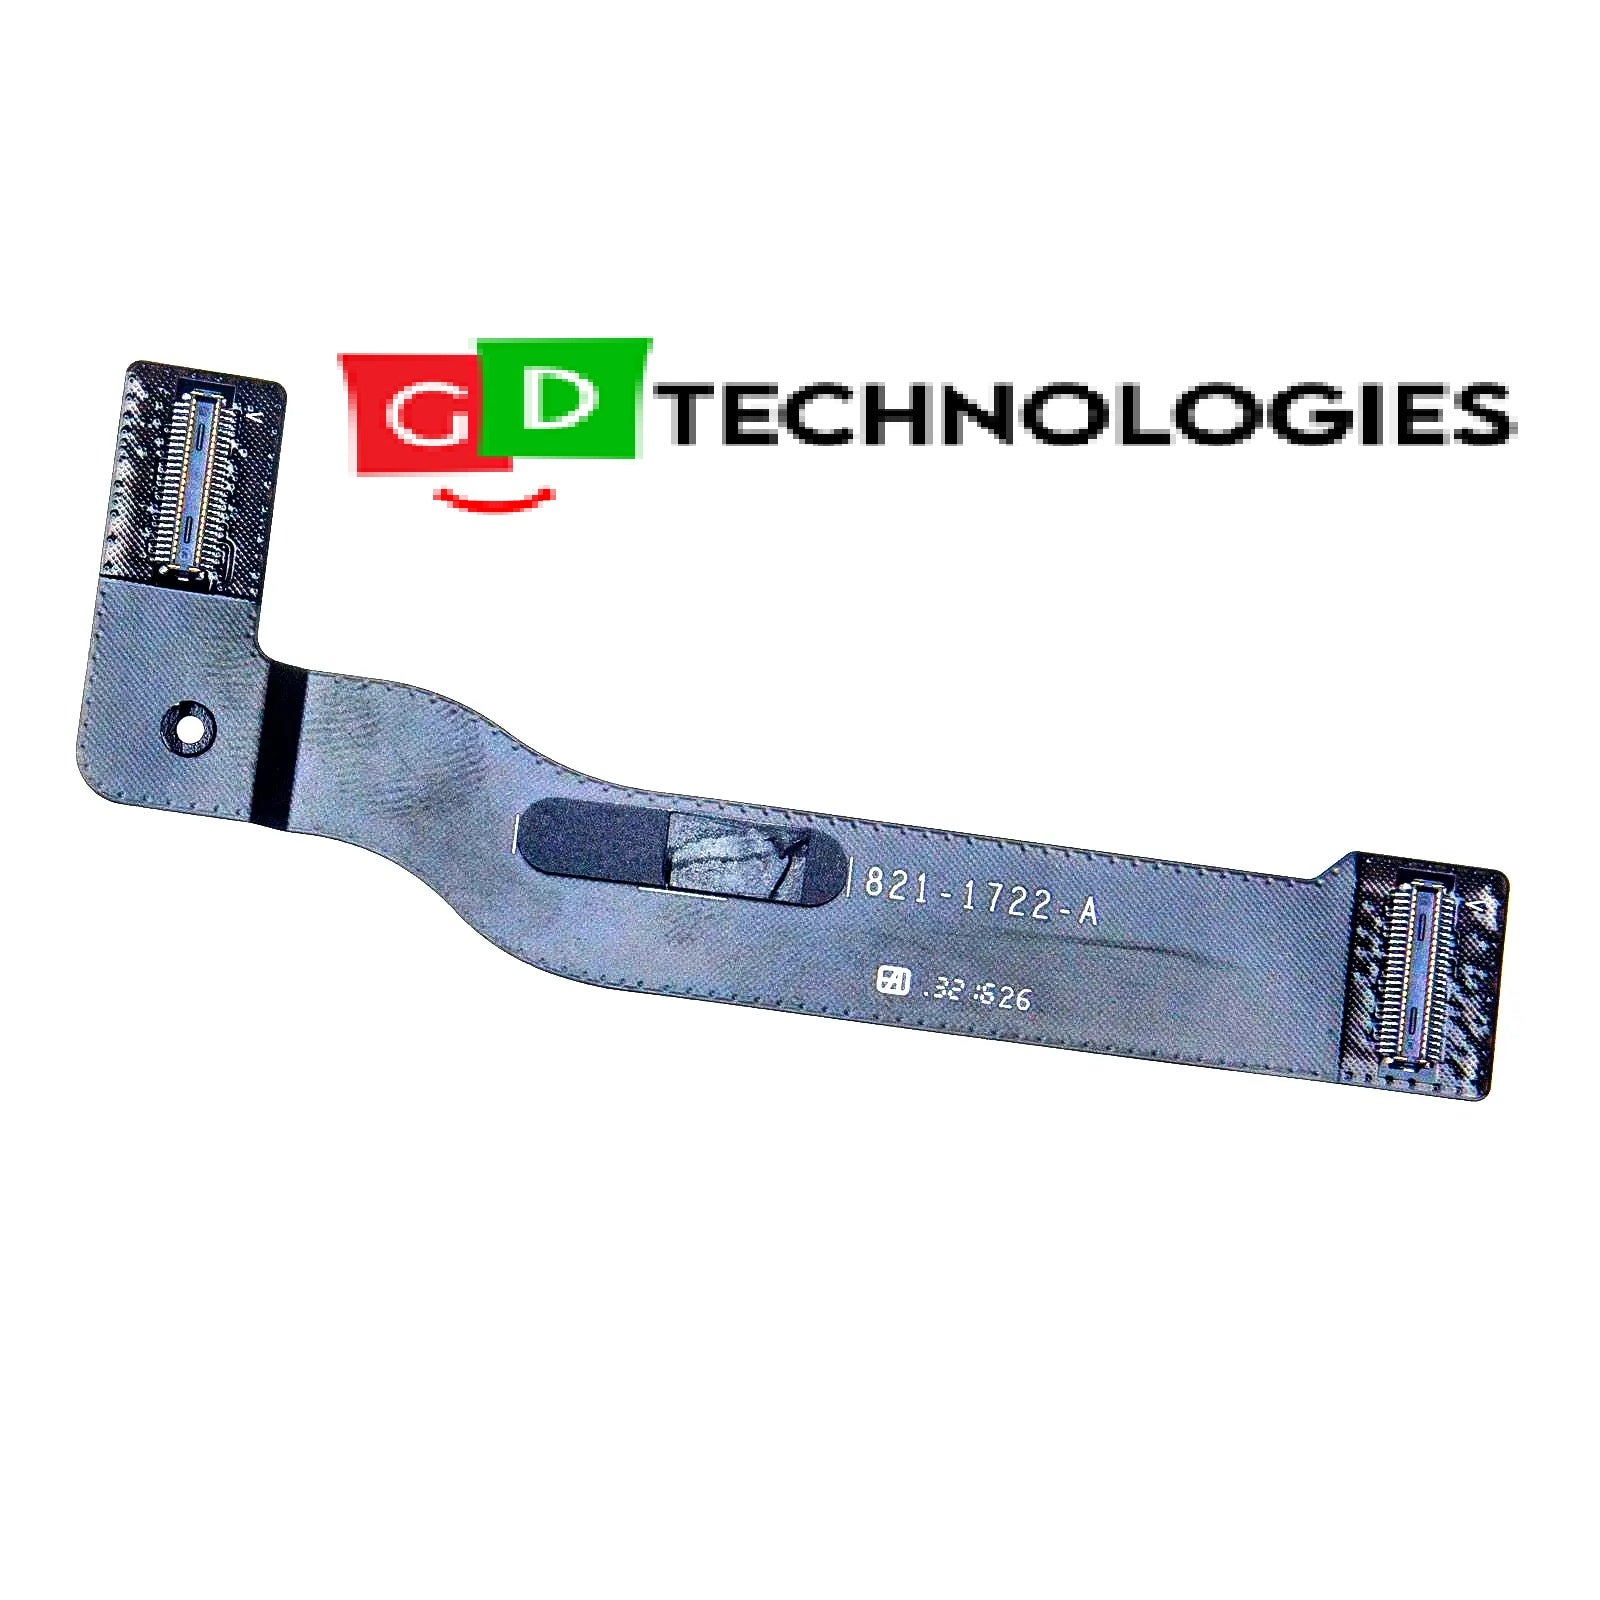 A1466 I/O Board Flex Cable for Apple MacBook Air 13 inch A1466 Mid 2013, A1466 Early 2014, A1466 Early 2015, A1466 Early Mid 2016, A1466 Mid 2017